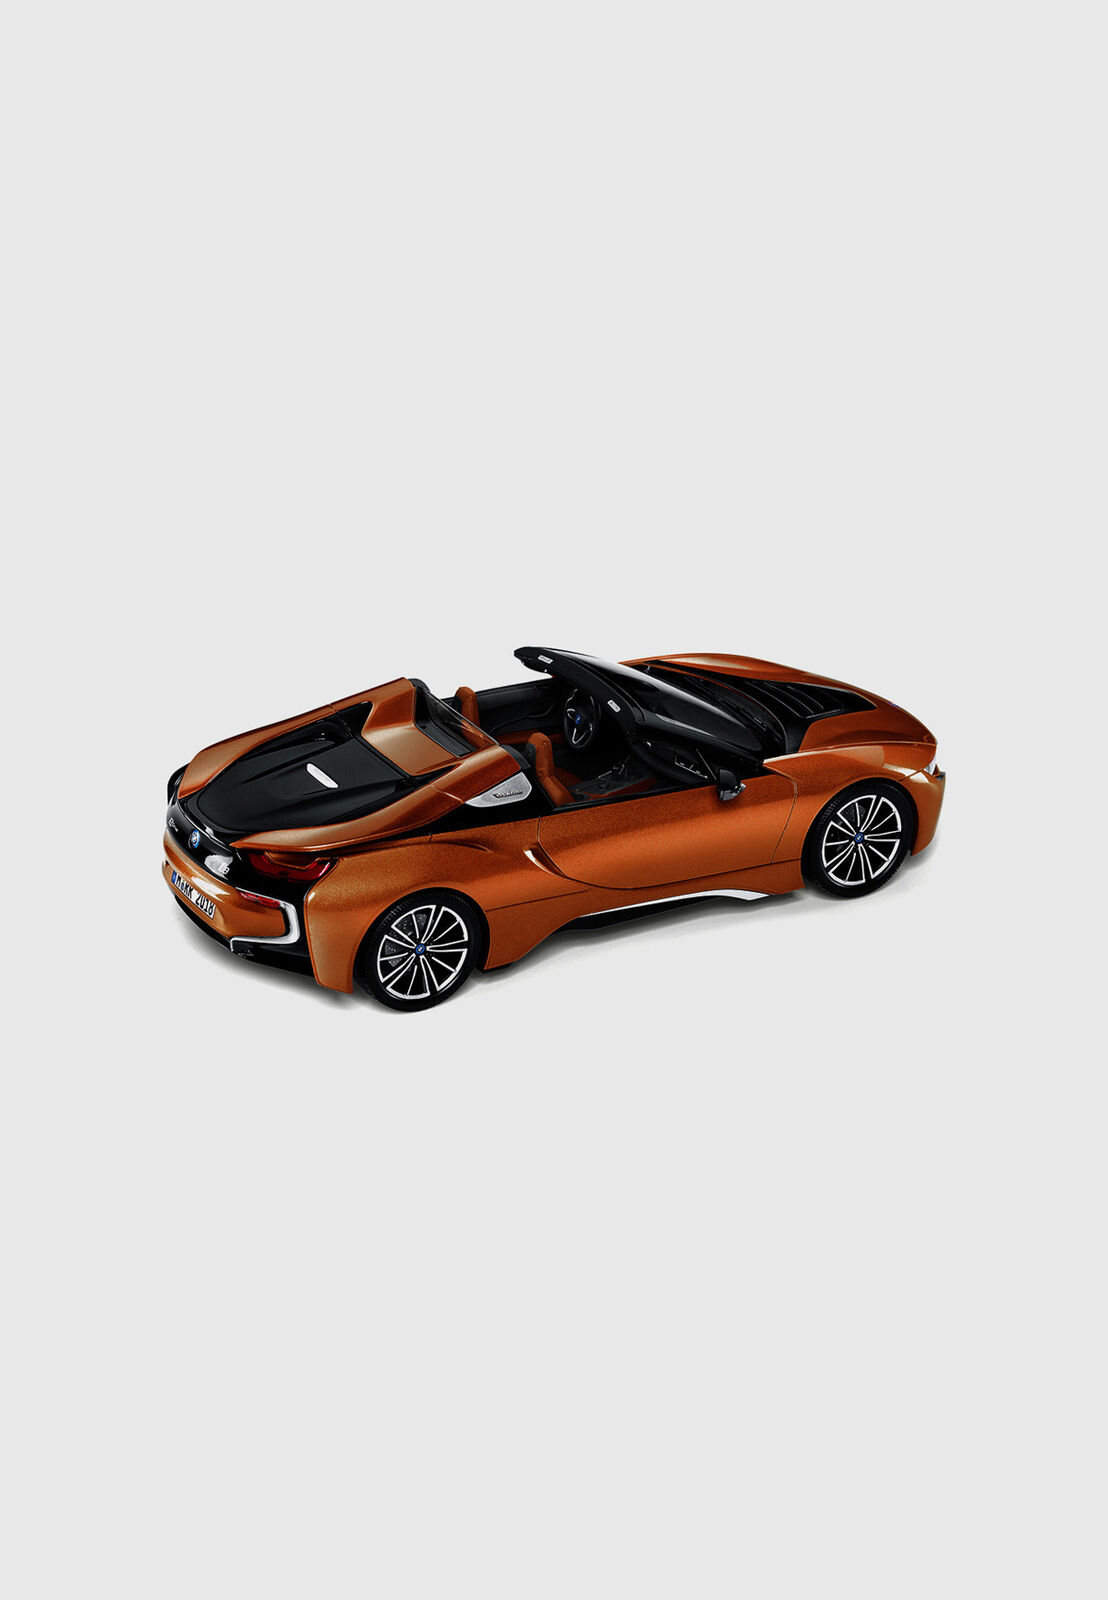 Opera kandidaat cilinder 1:12 BMW i8 Roadster Limited Edition miniatuur | BMW Lifestyle Store